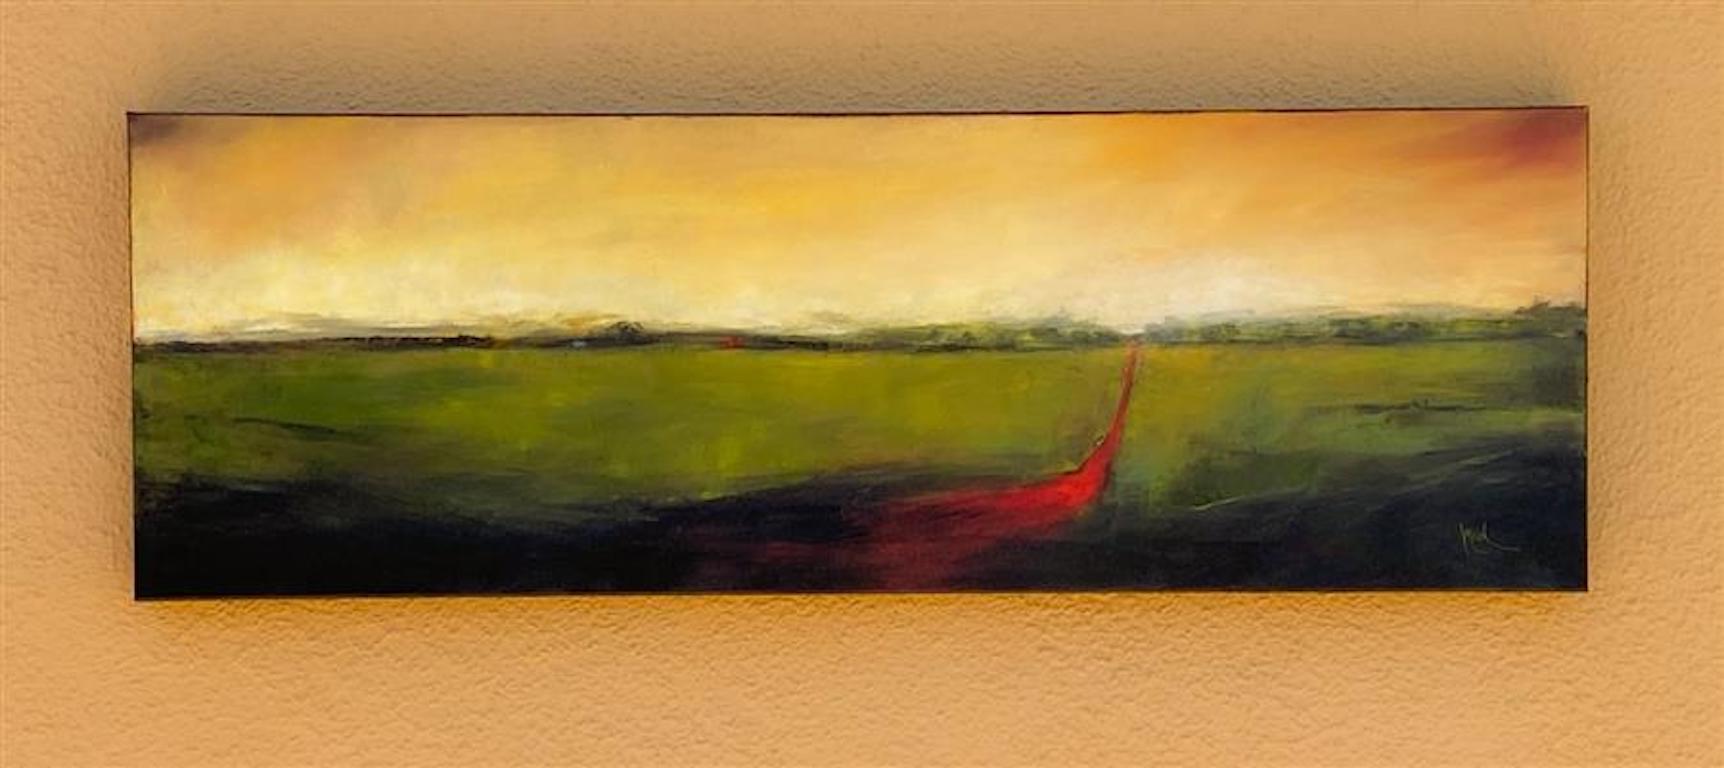 <p>Artist Comments<br />A scarlet road moves forward into the distance through a soft-focused countryside creating a contemporary atmospheric landscape. 